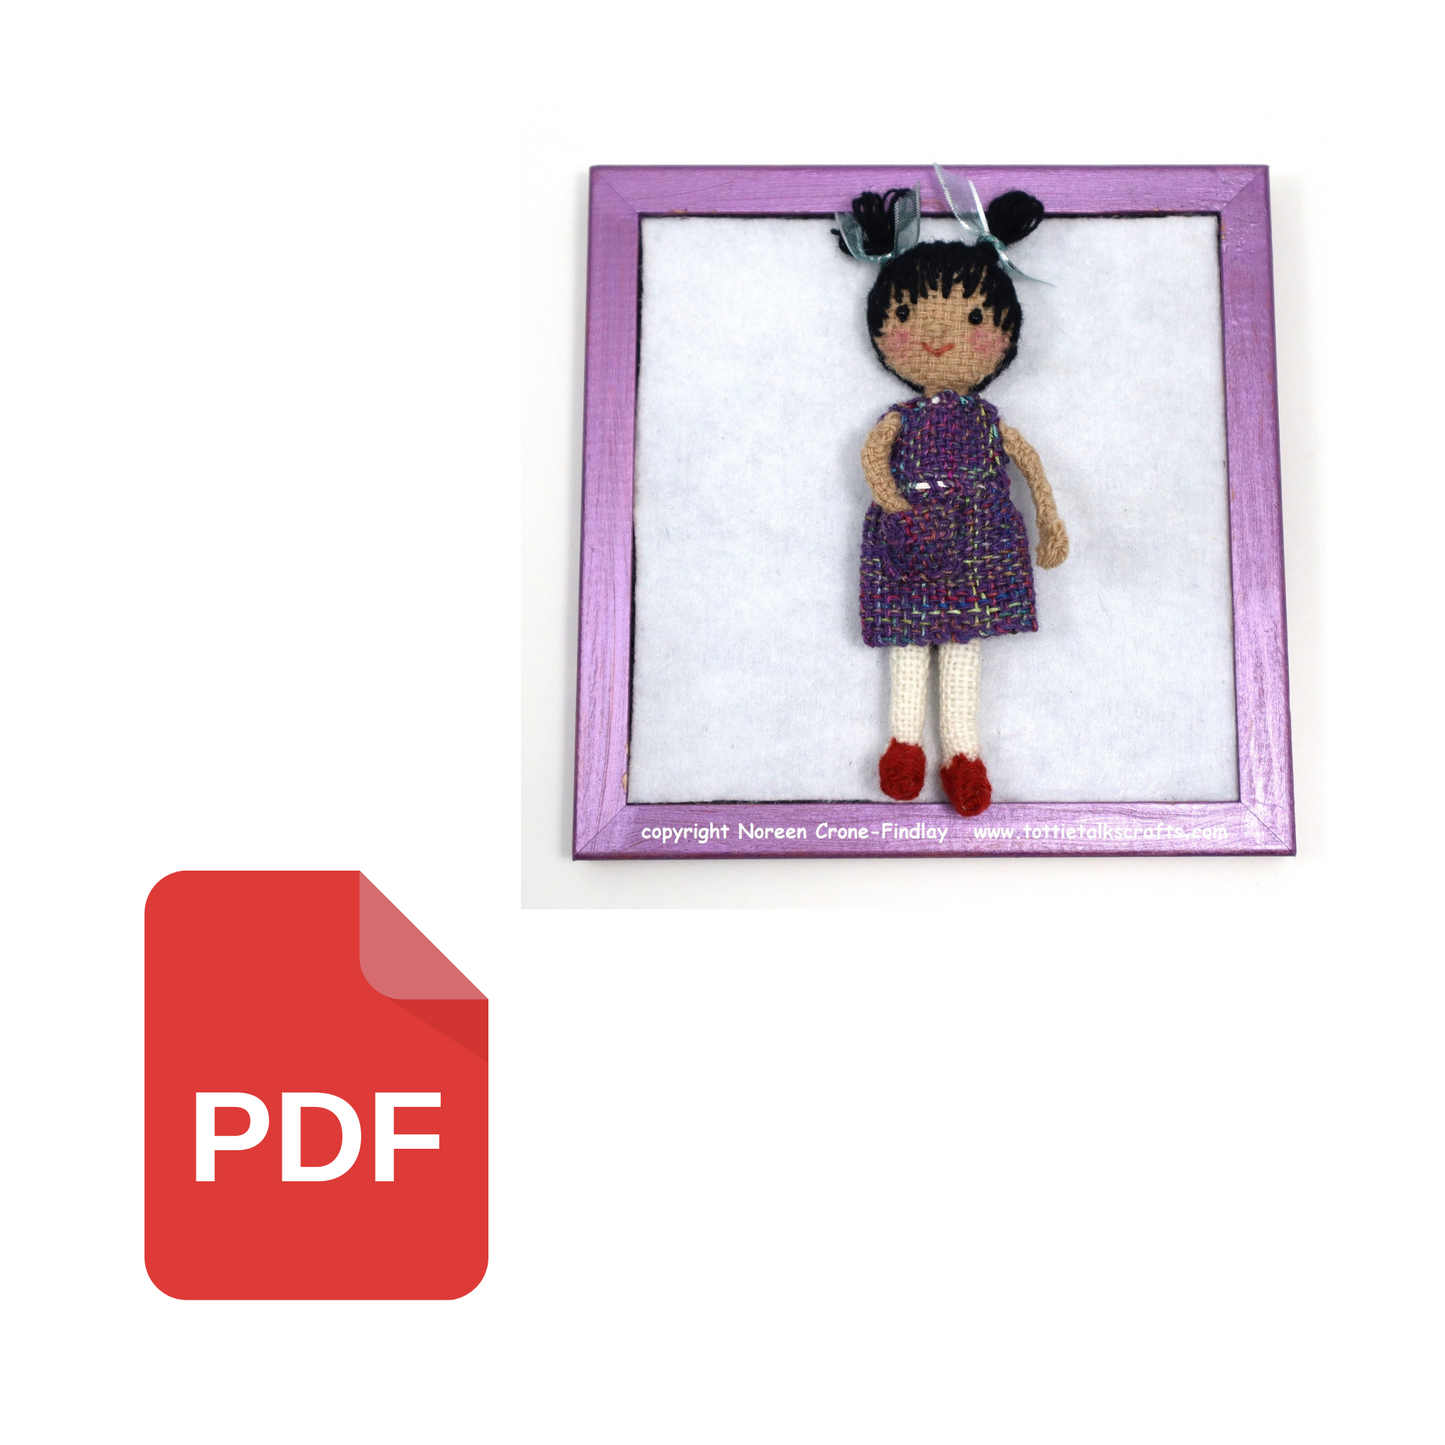 The Lily Doll Pocket Pinafore Dress Instructional .PDF